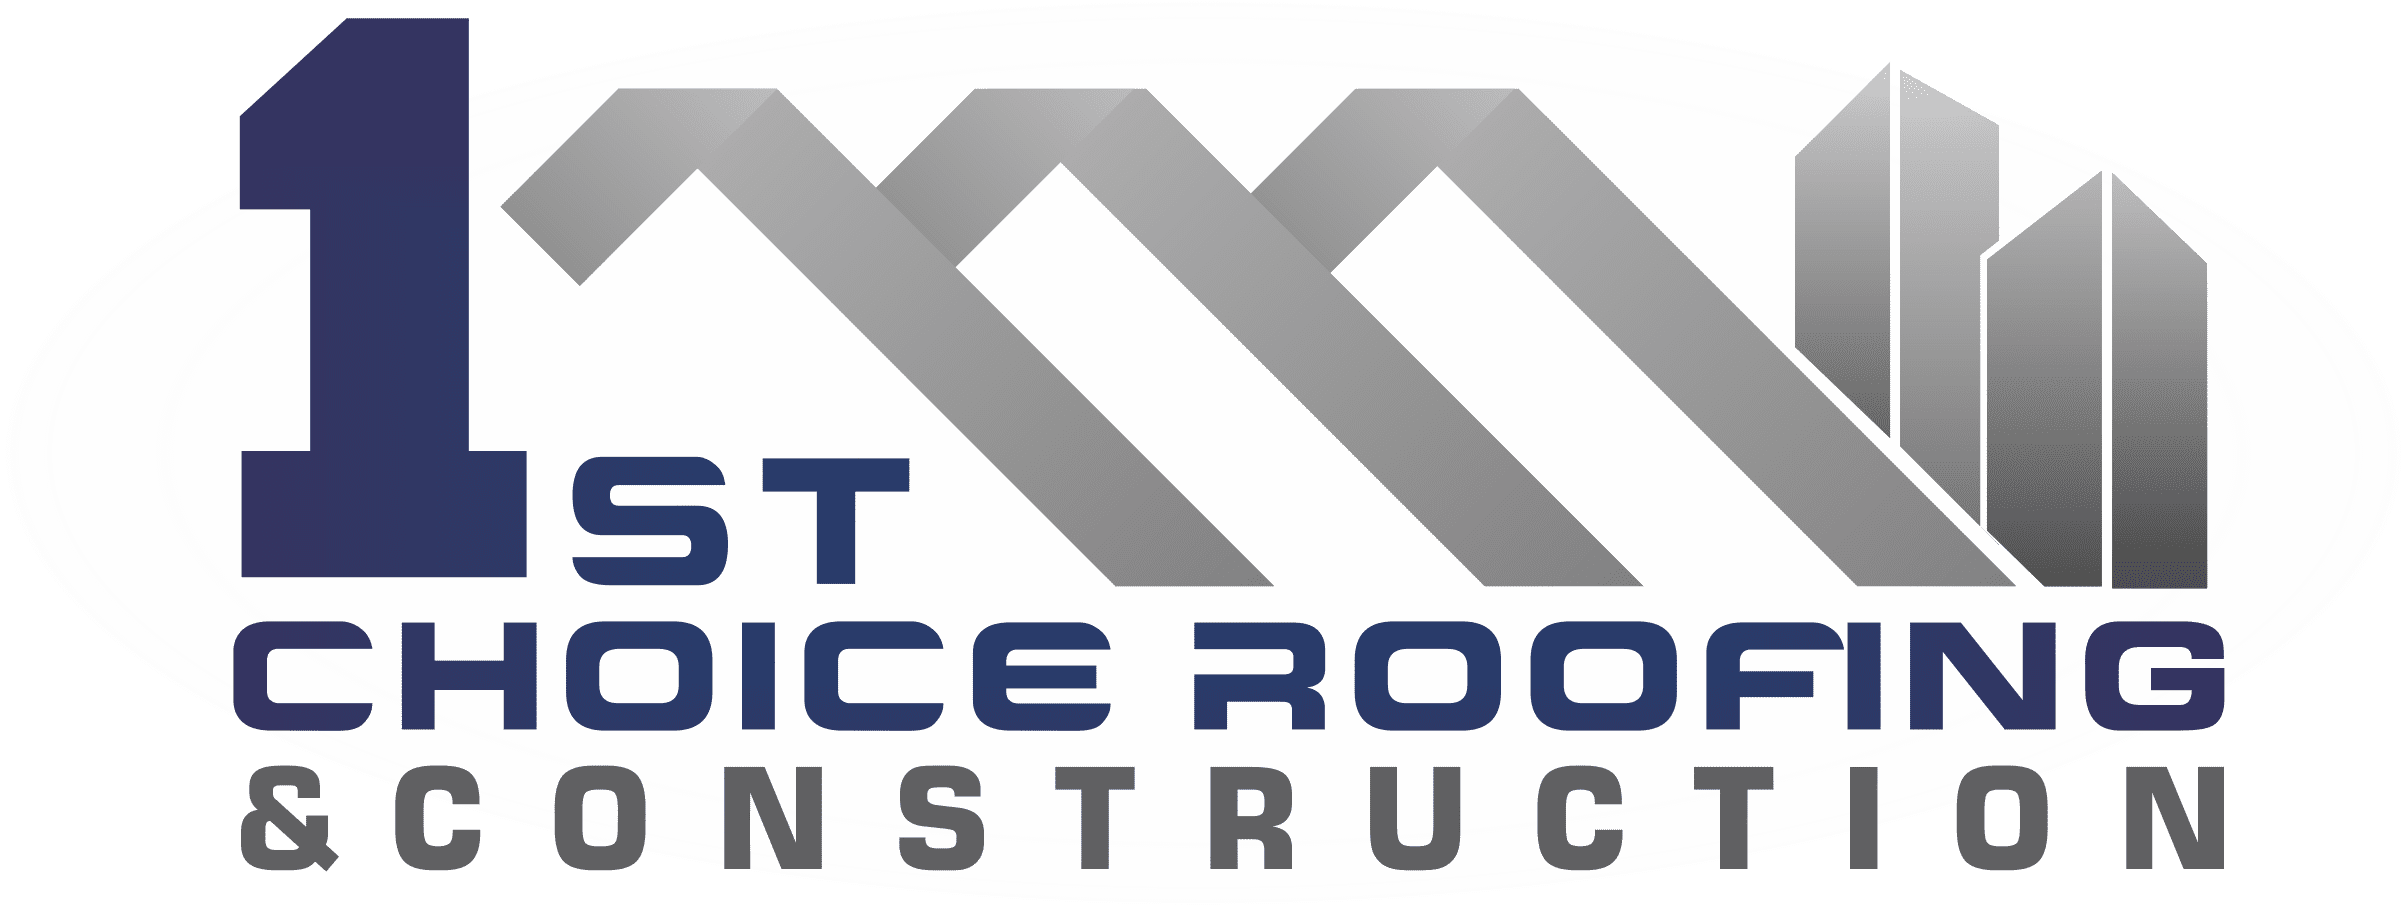 1st Choice Roofing & Construction